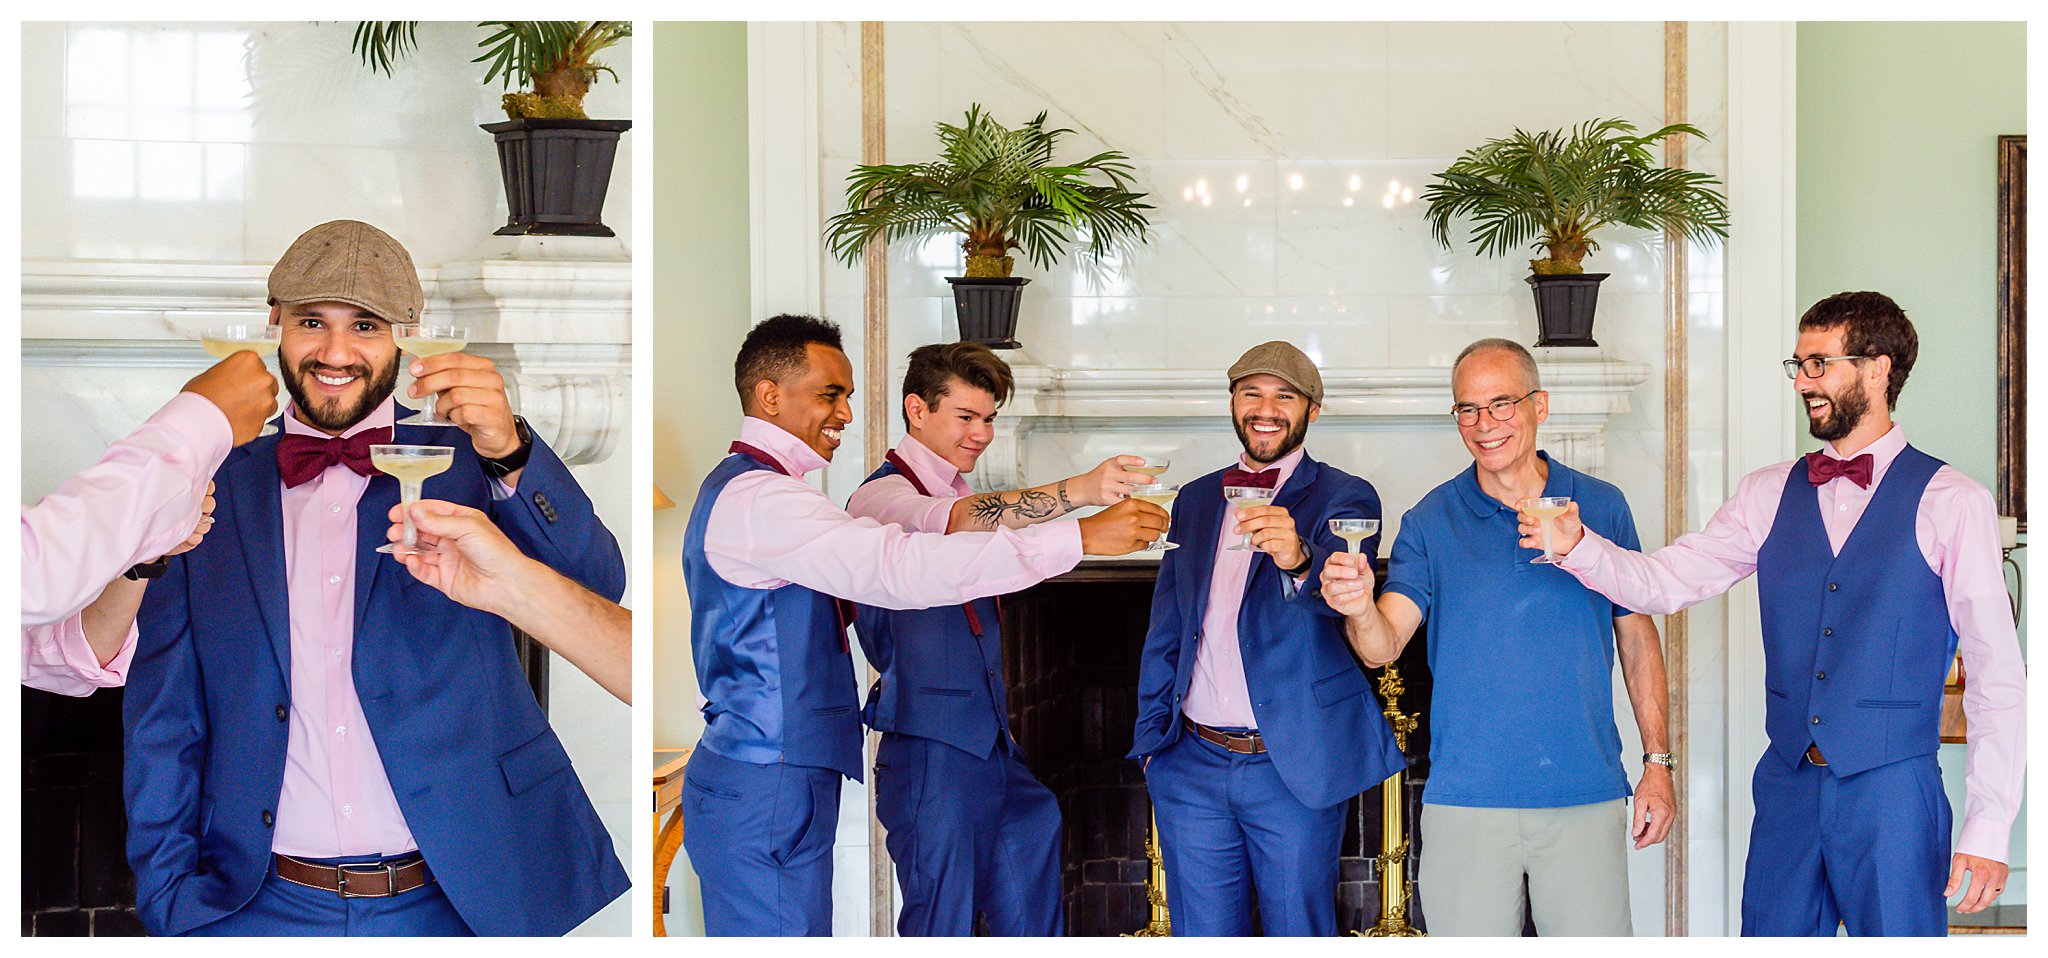 A groom toasts with his groomsmen